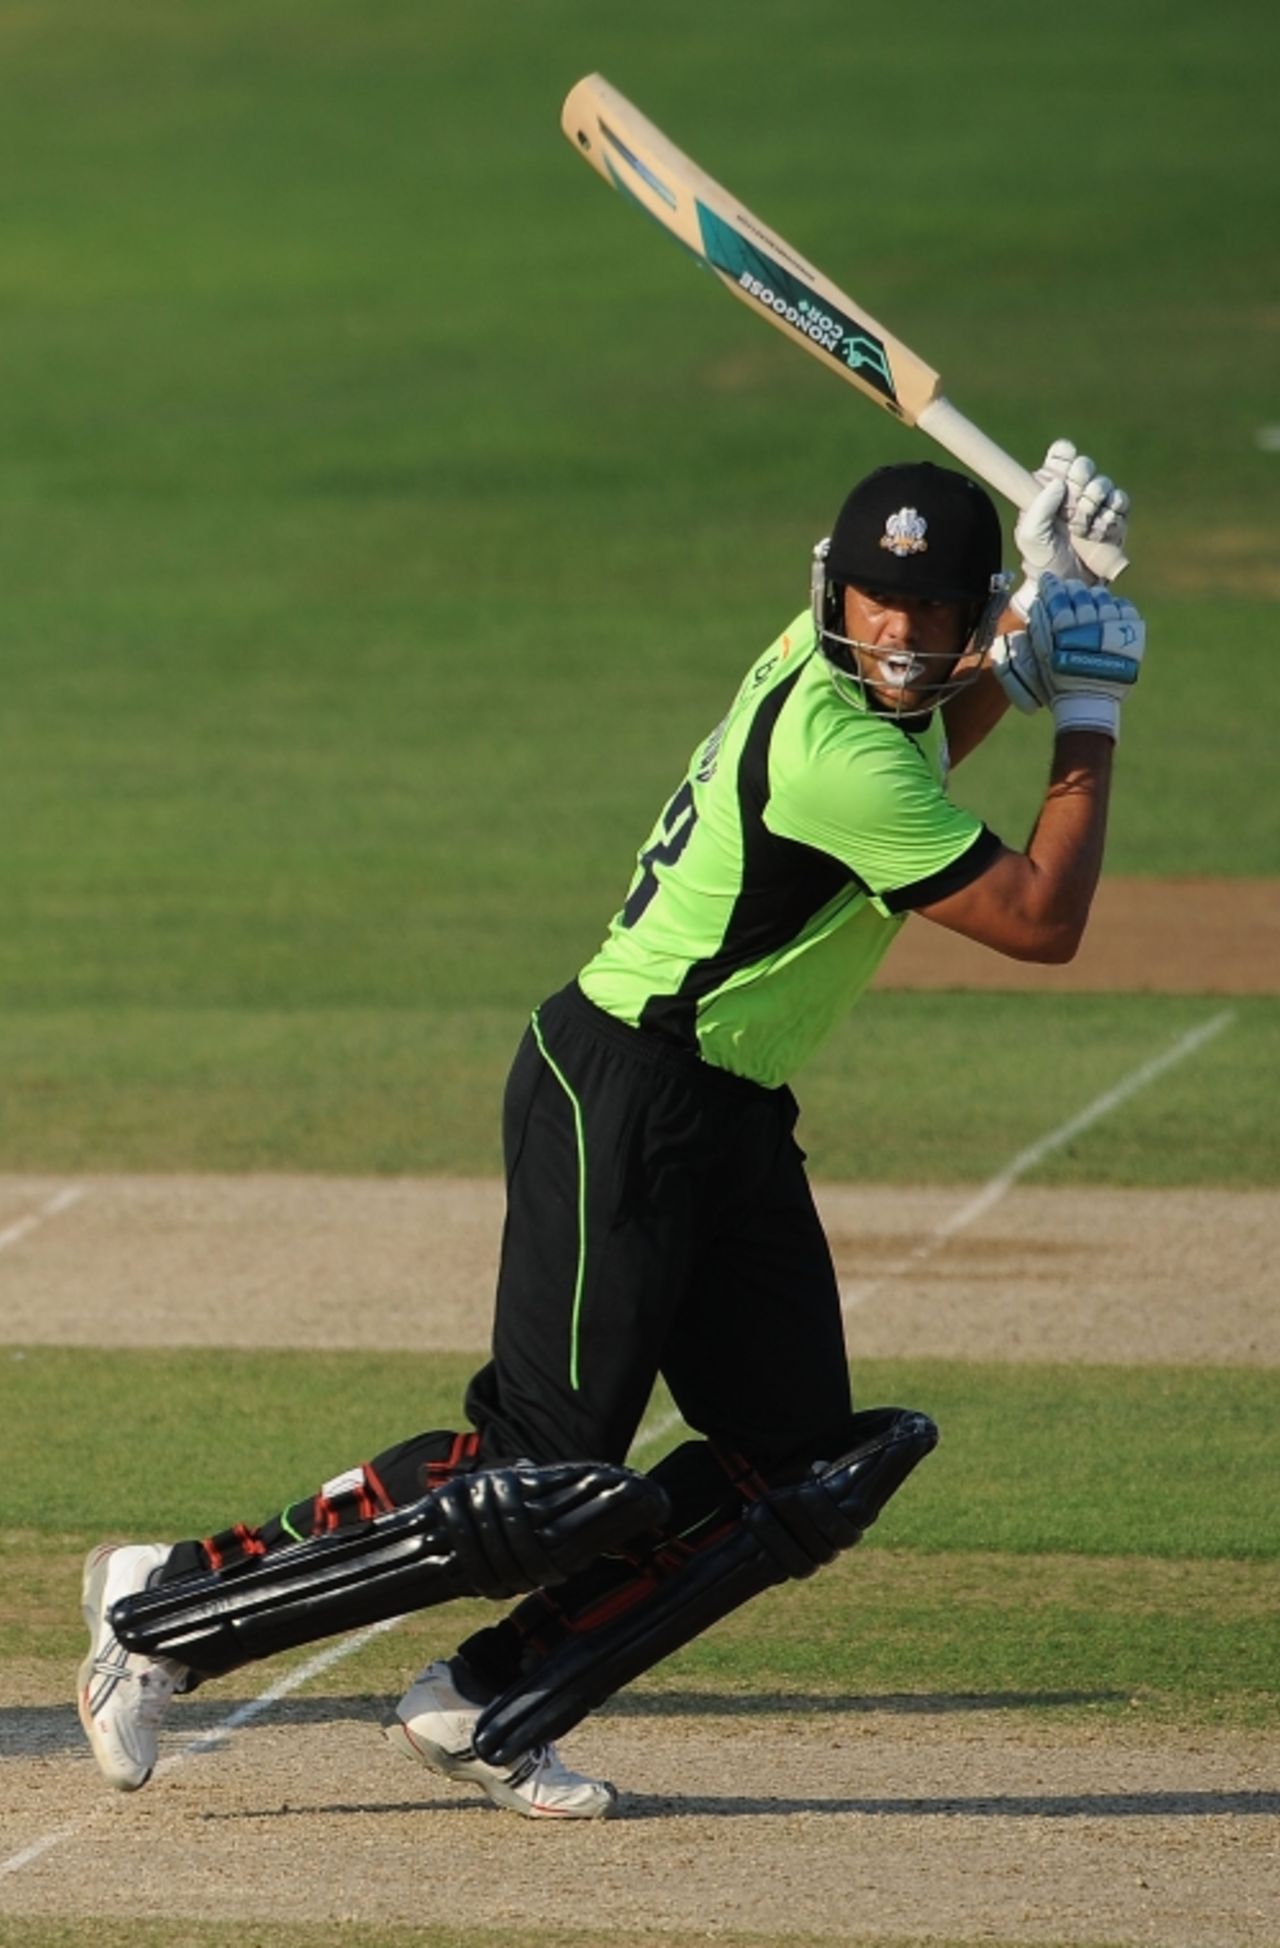 Andrew Symonds top-scored with 63 from 33 balls to set up an 11-run win for Surrey, Surrey v Hampshire, Friends Provident t20, South Group, The Oval